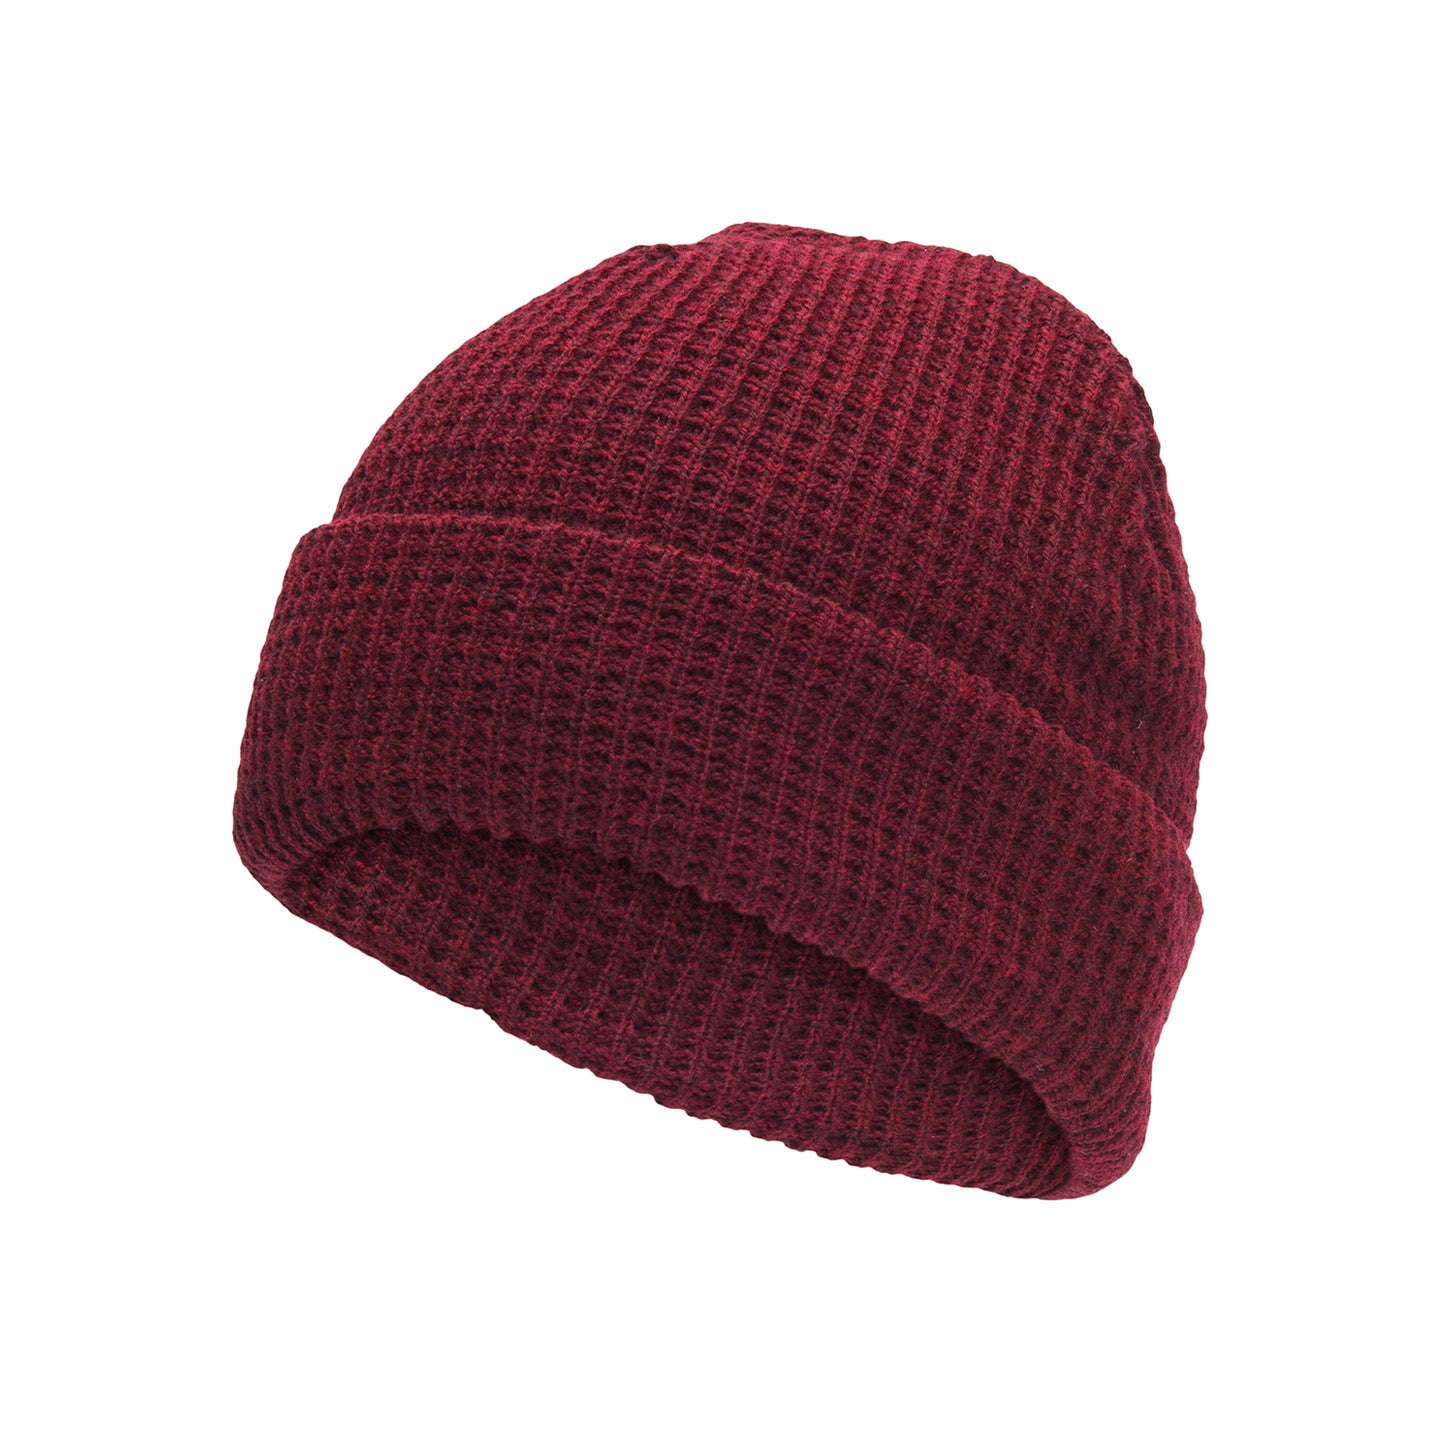 Burgundy Heather full product perspective